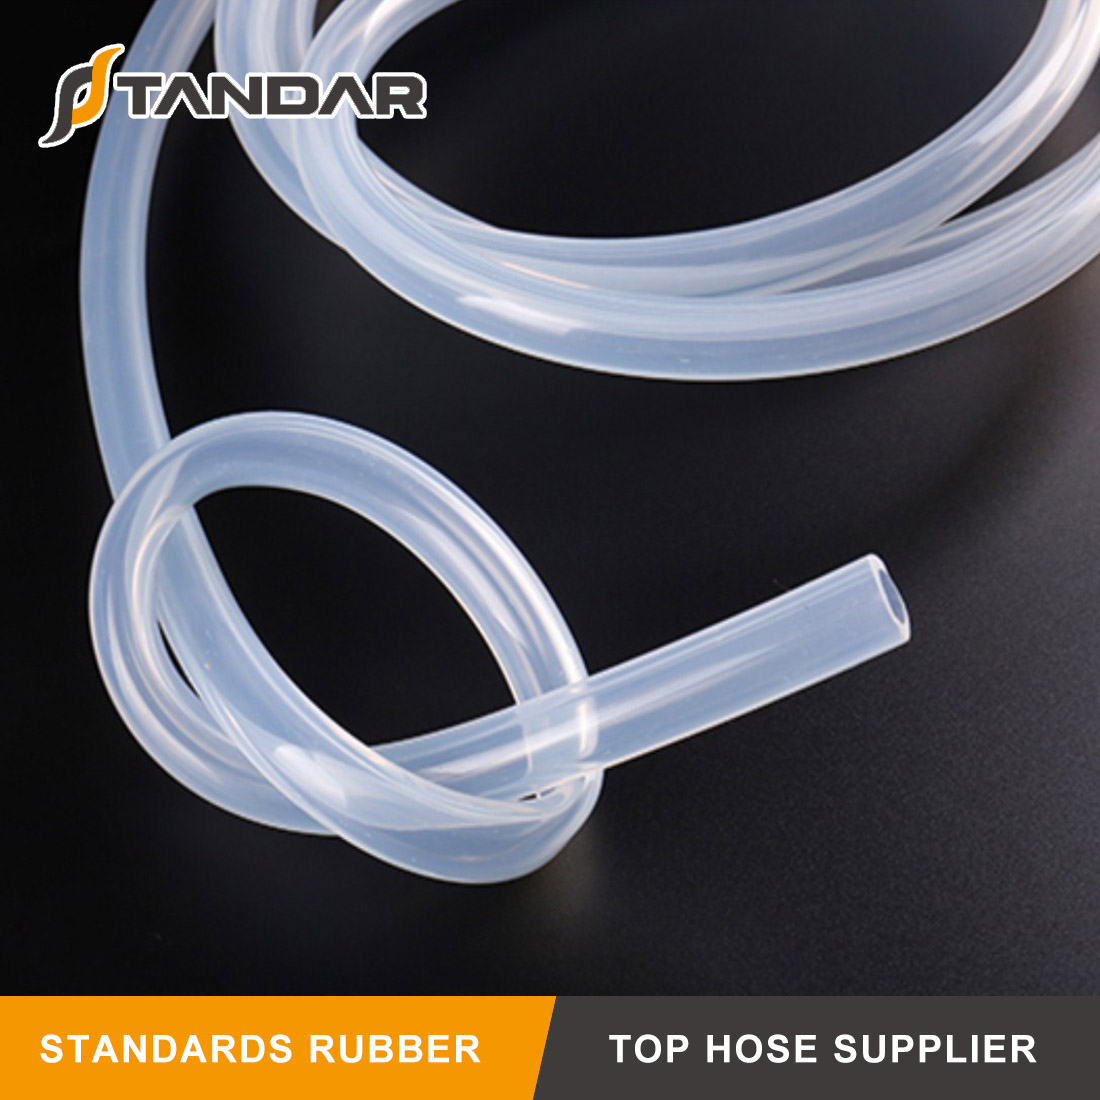 Silicone Milk Hose for The Dairy Industry